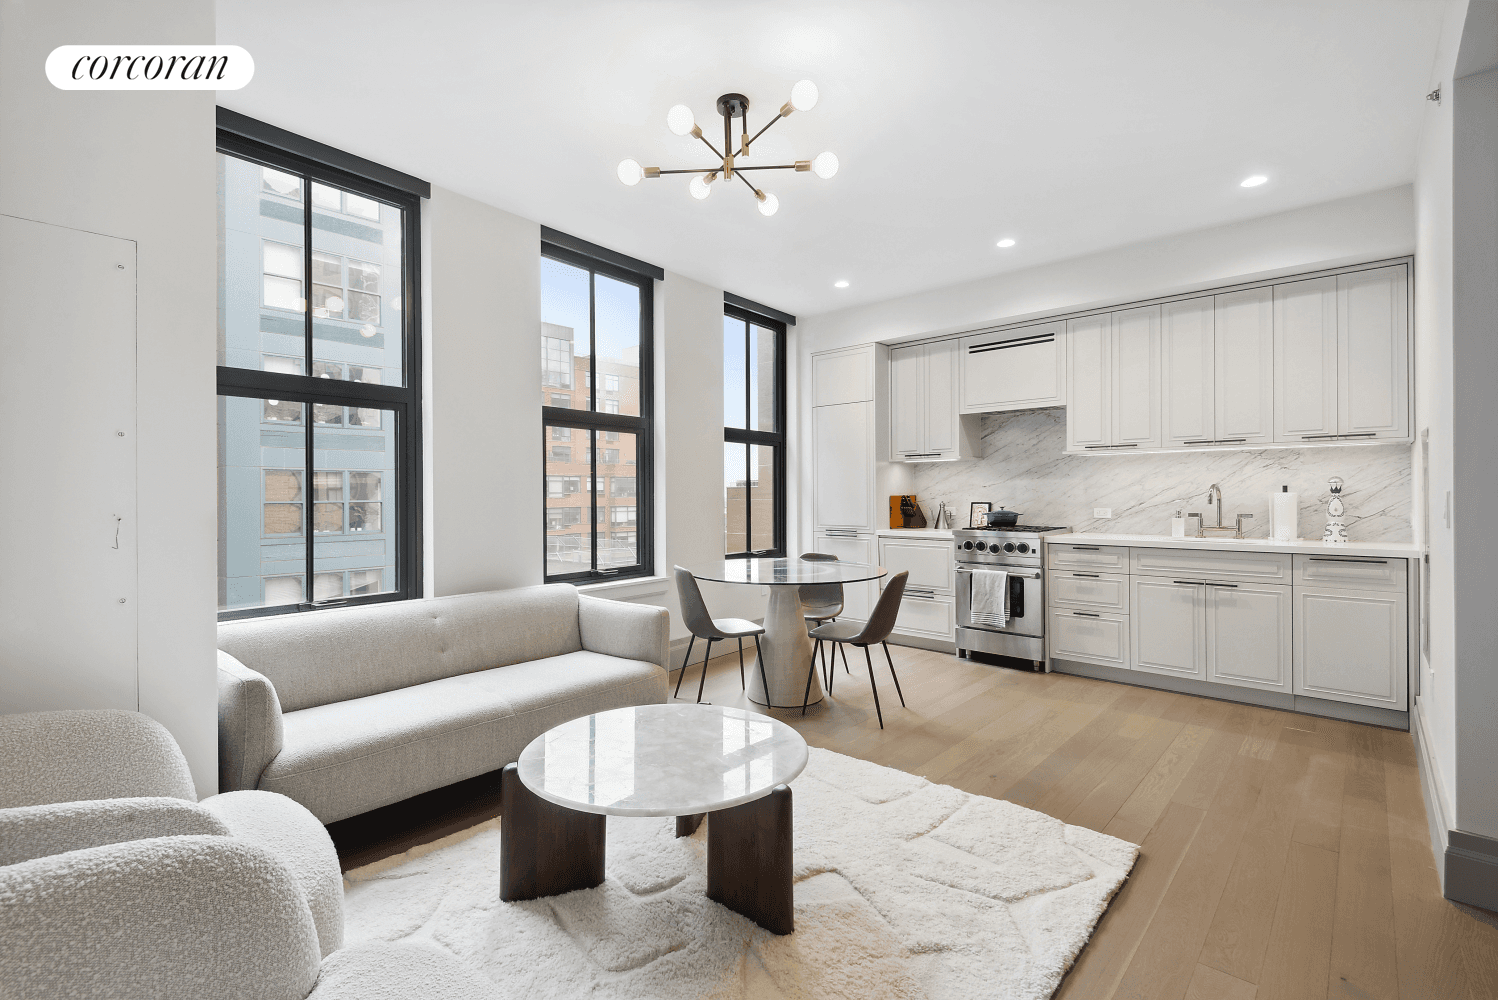 Discover the epitome of boutique living at The Symon, 76 Schermerhorn's newest development in the heart of Brooklyn Heights.